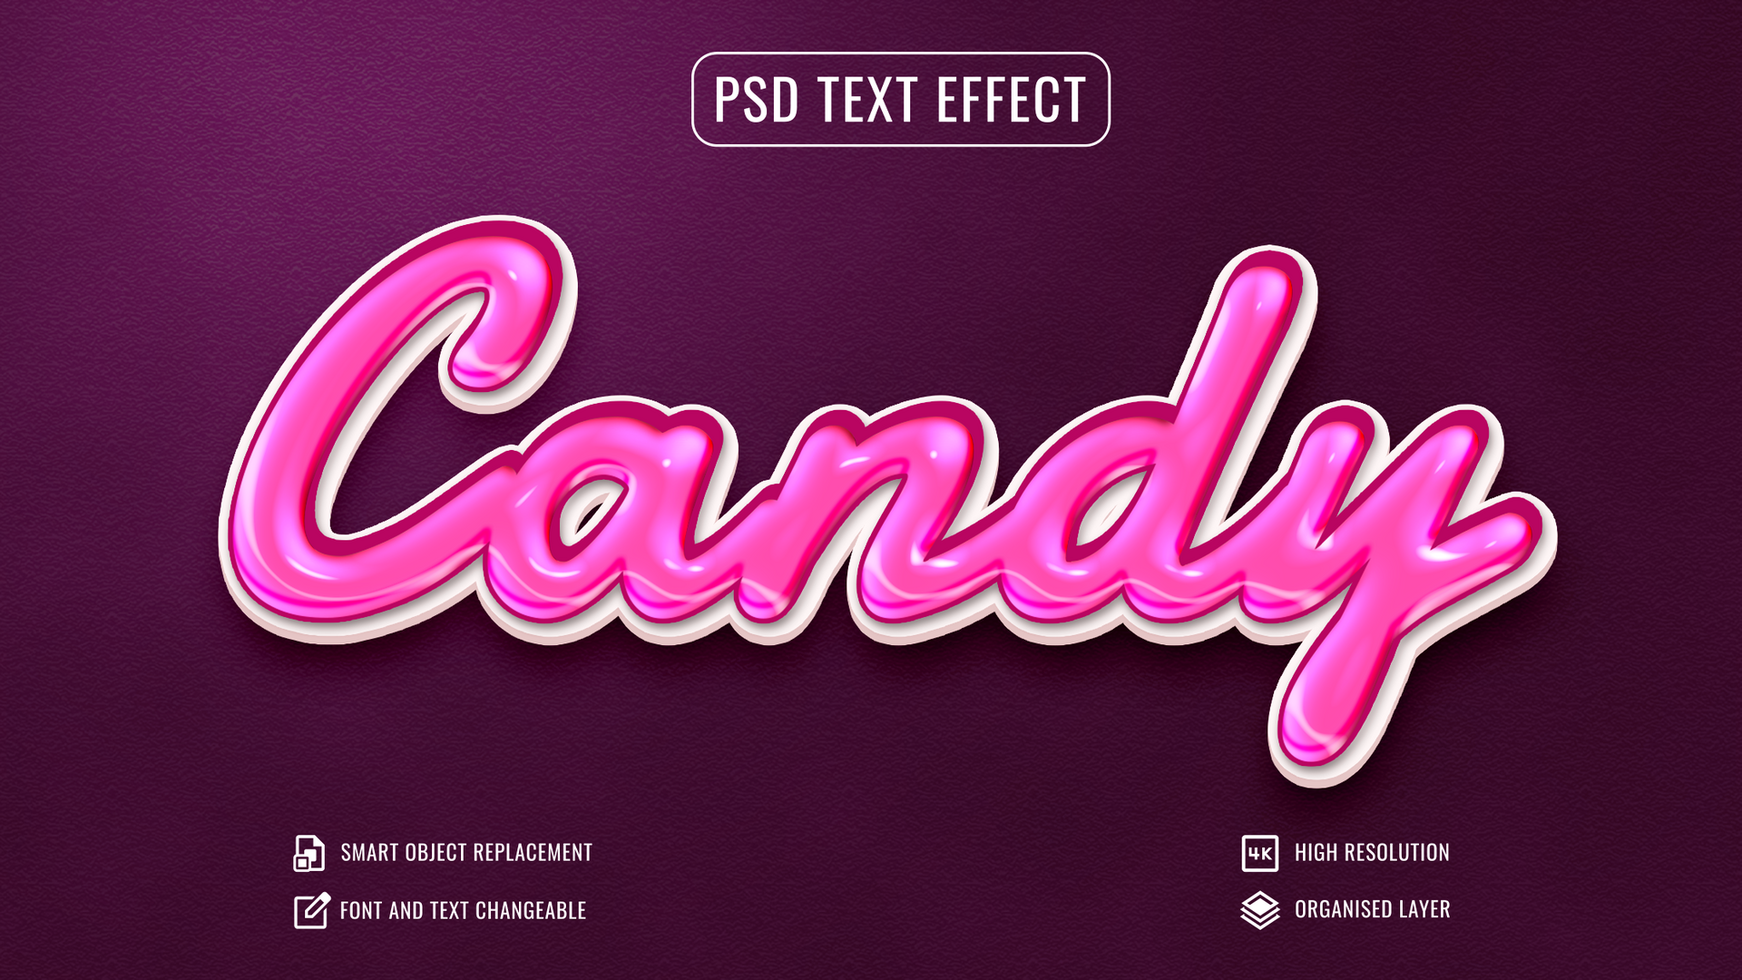 Shiny Candy text effect on isolated background psd